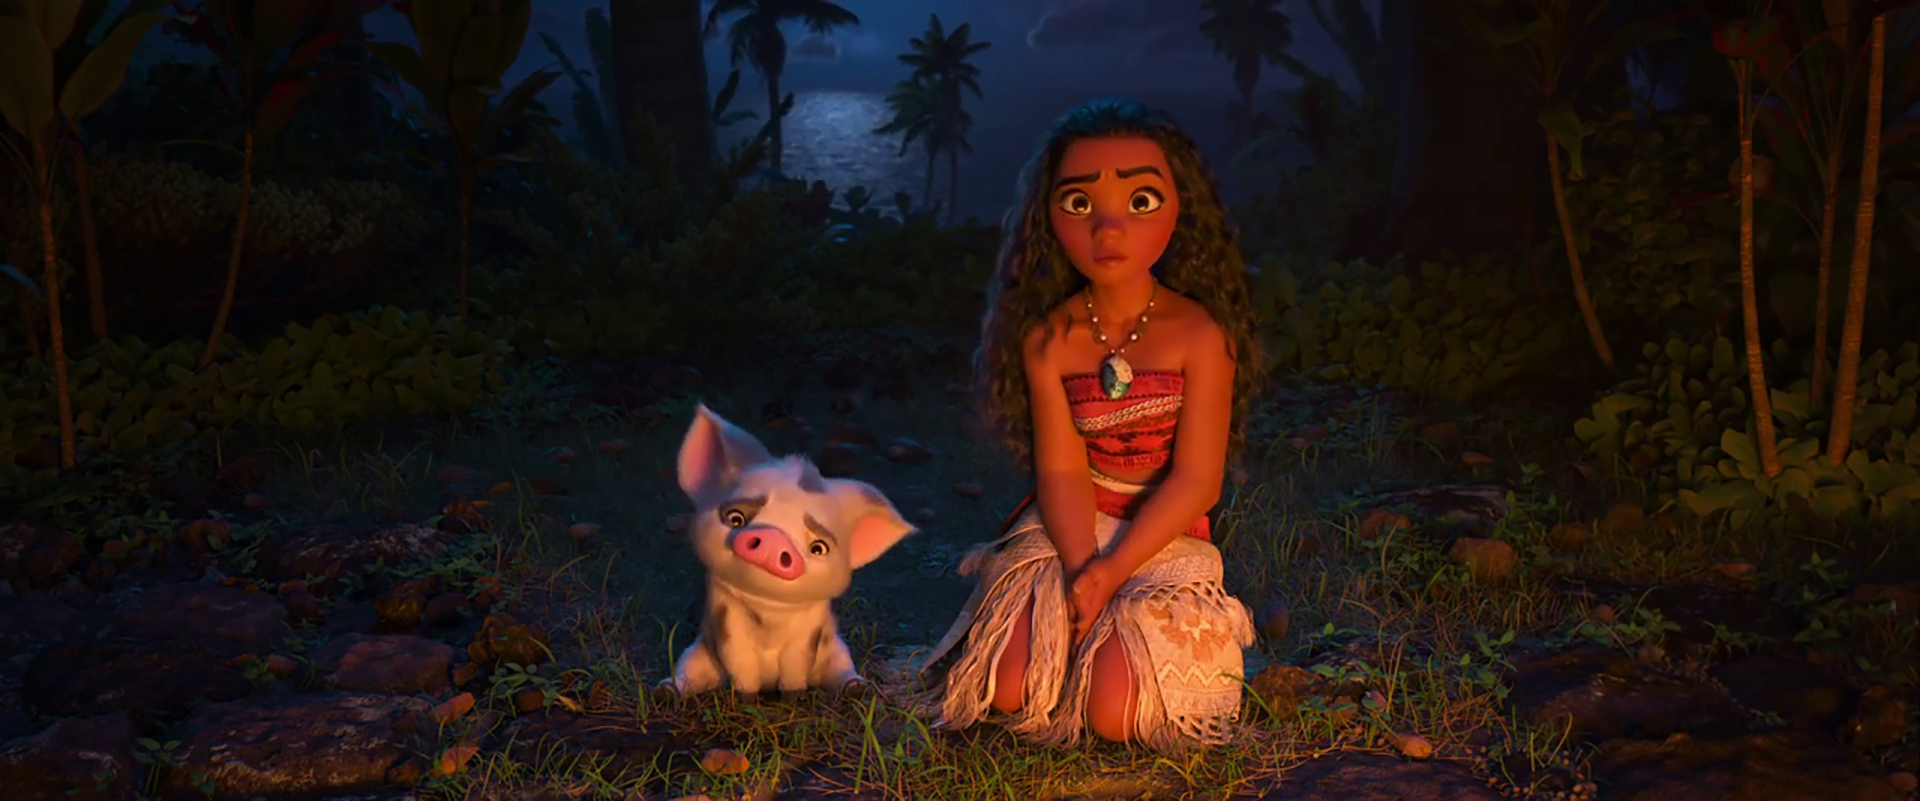 Disney is roaring waves in teaser for new animation feature ‘Moana’